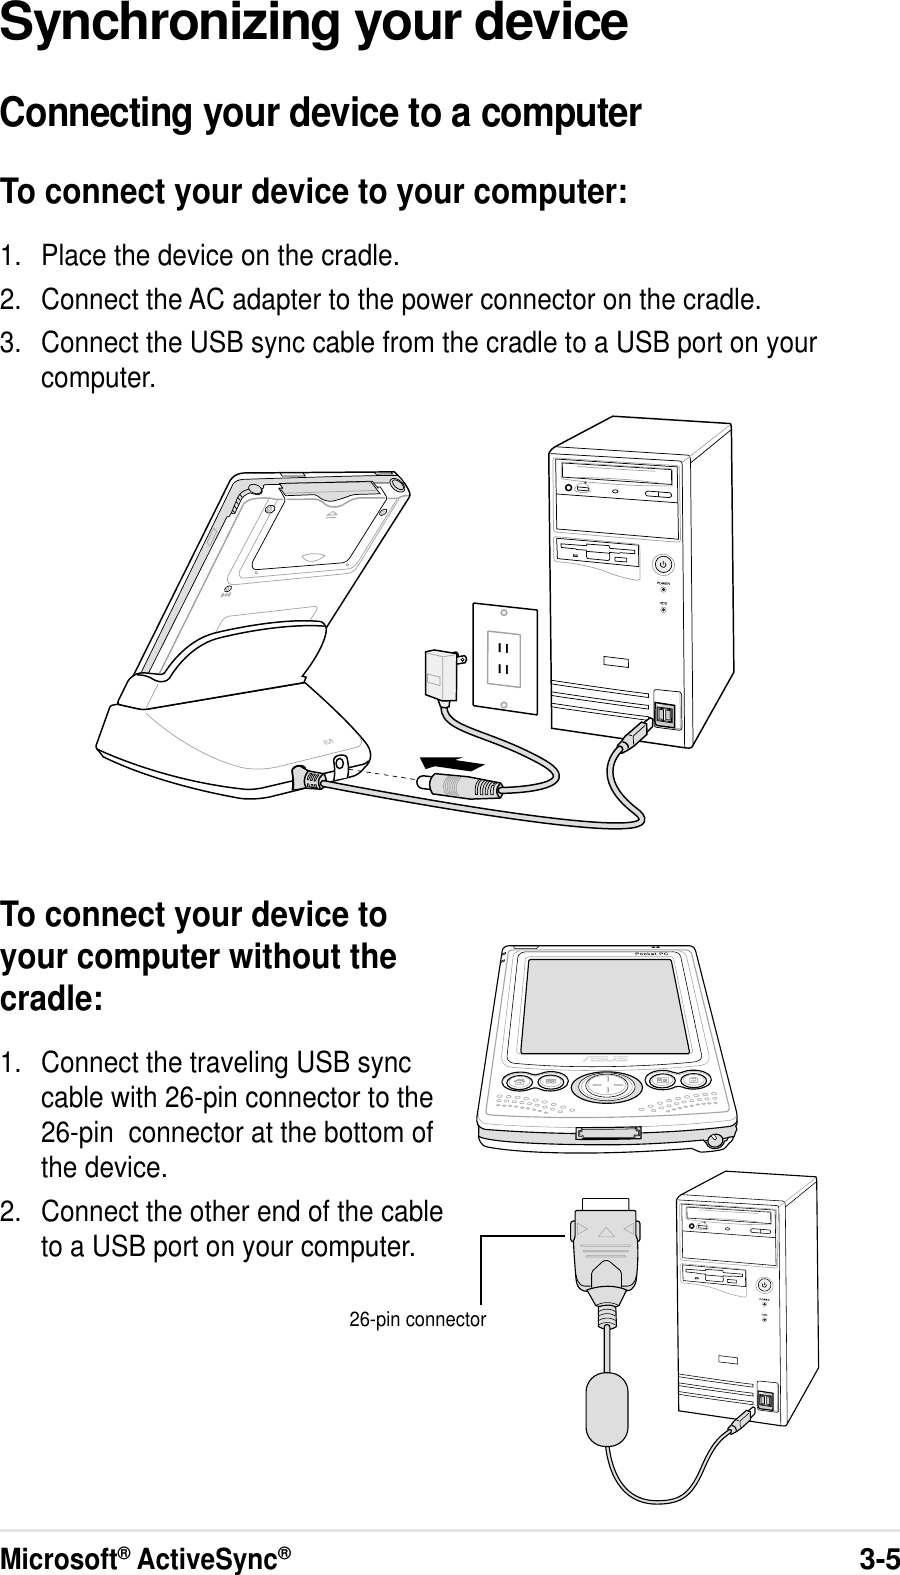 Microsoft® ActiveSync®3-5Synchronizing your deviceConnecting your device to a computerTo connect your device to your computer:1. Place the device on the cradle.2. Connect the AC adapter to the power connector on the cradle.3. Connect the USB sync cable from the cradle to a USB port on yourcomputer.To connect your device toyour computer without thecradle:1. Connect the traveling USB synccable with 26-pin connector to the26-pin  connector at the bottom ofthe device.2. Connect the other end of the cableto a USB port on your computer.26-pin connector